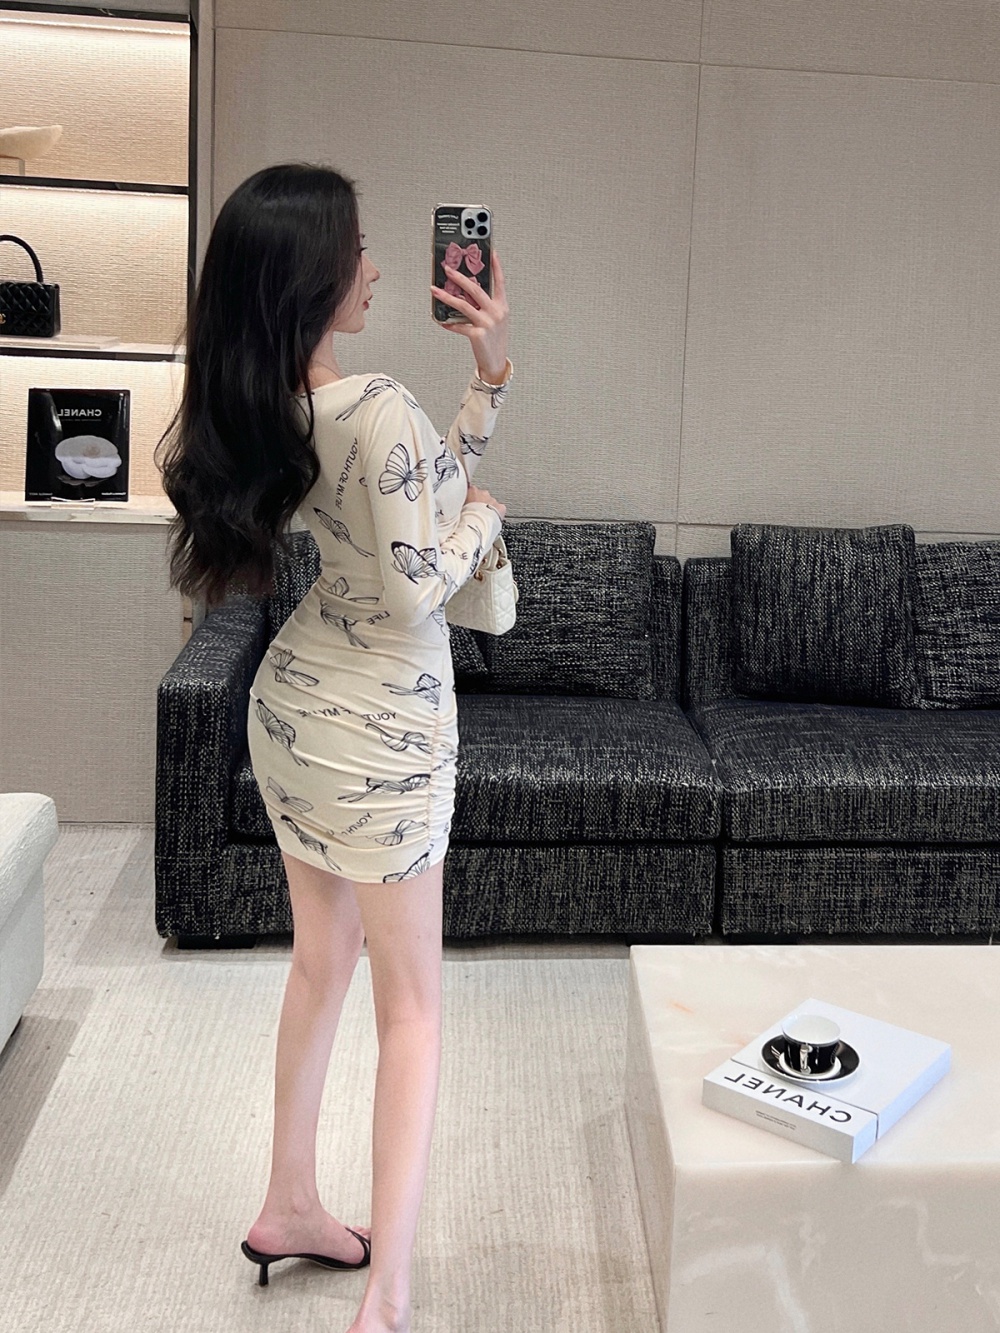 Sexy long sleeve printing package hip pinched waist dress